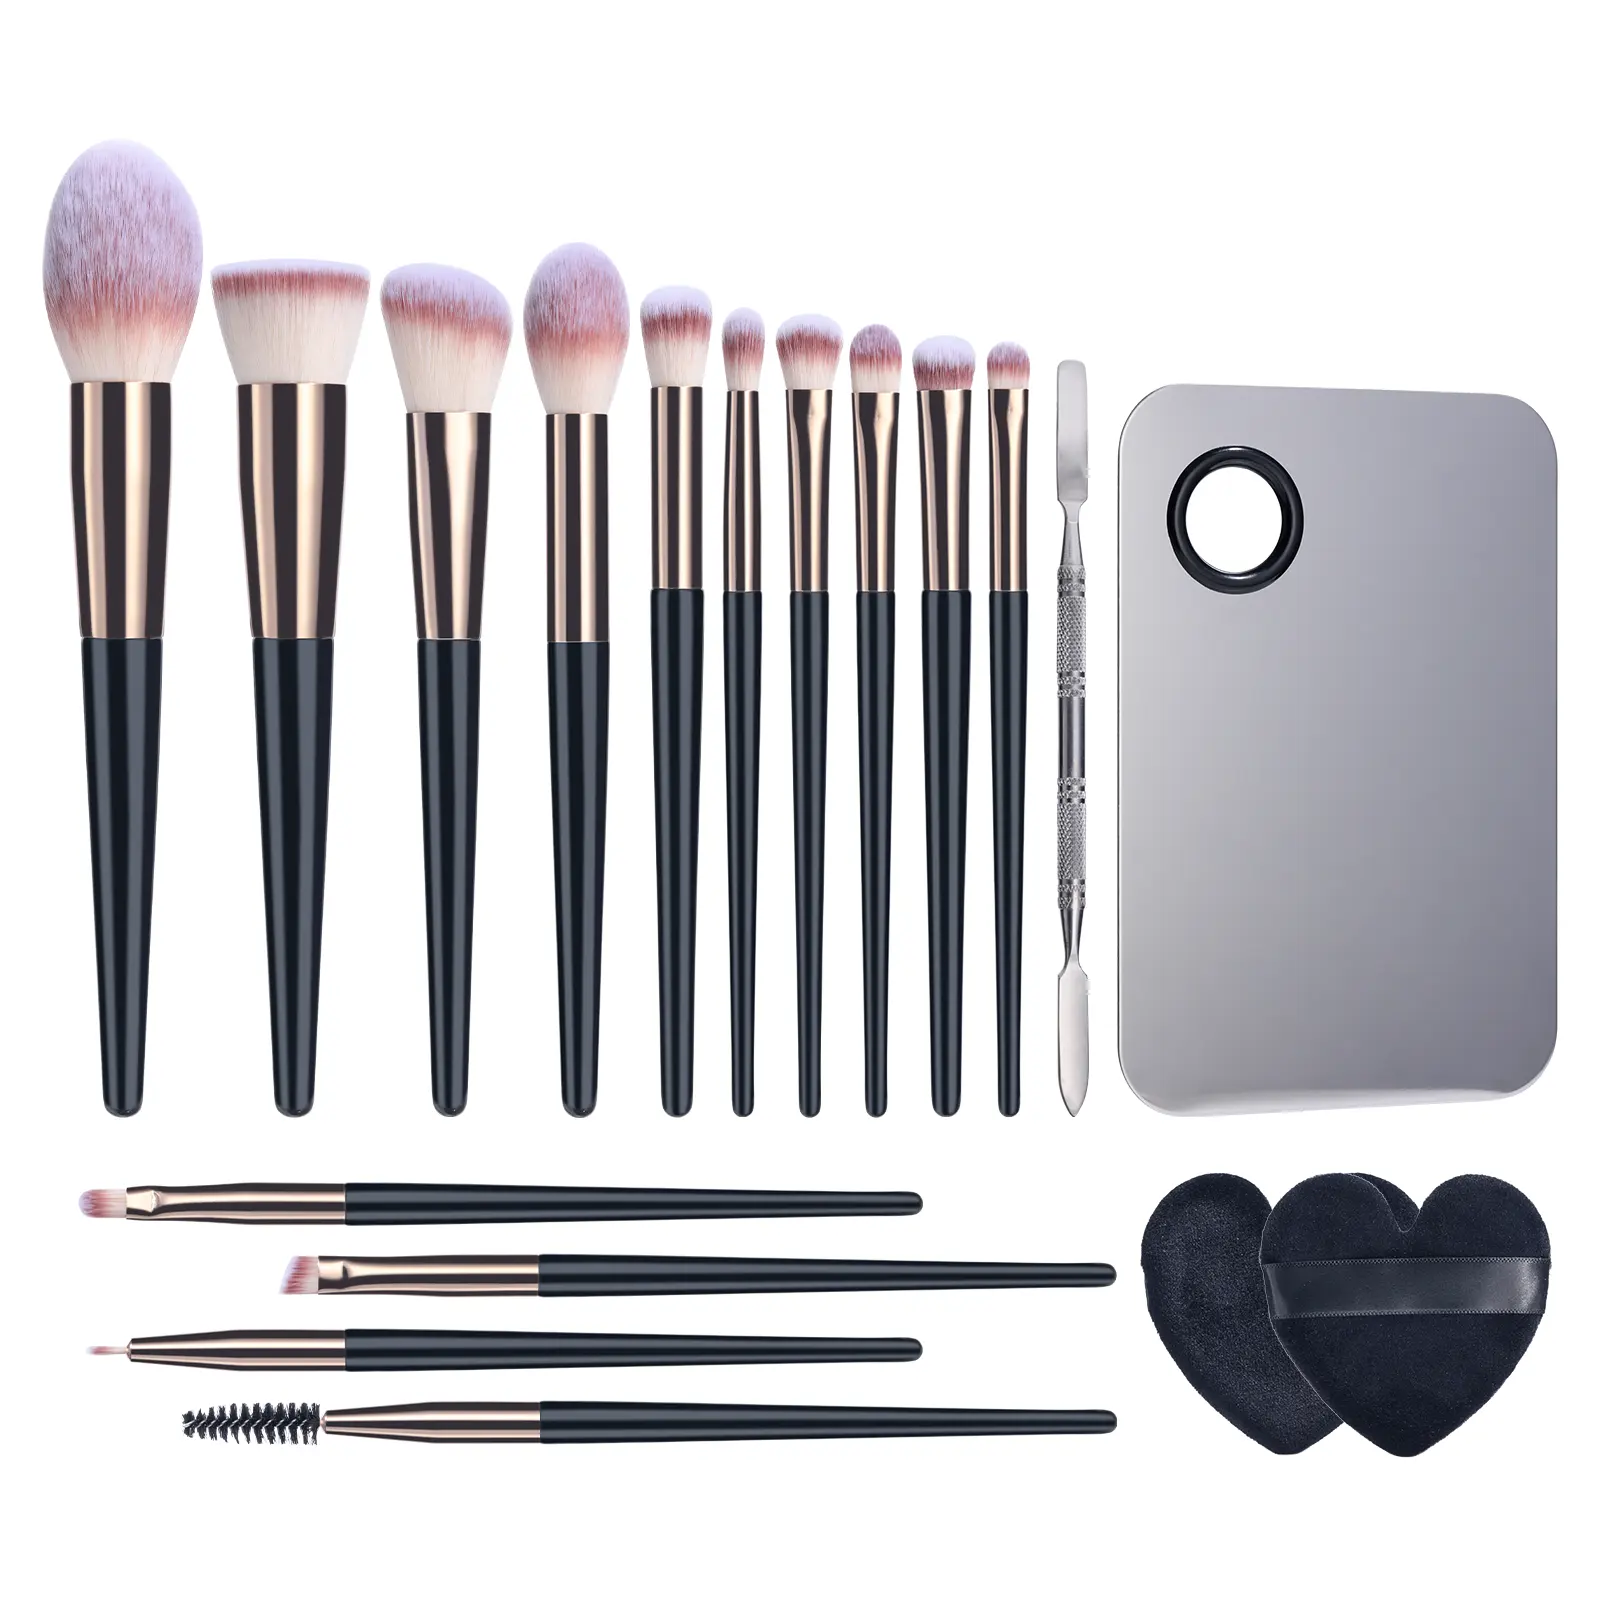 Professional Set Color Palette and Powder Puffs in High Aesthetics 10 Makeup Brushes